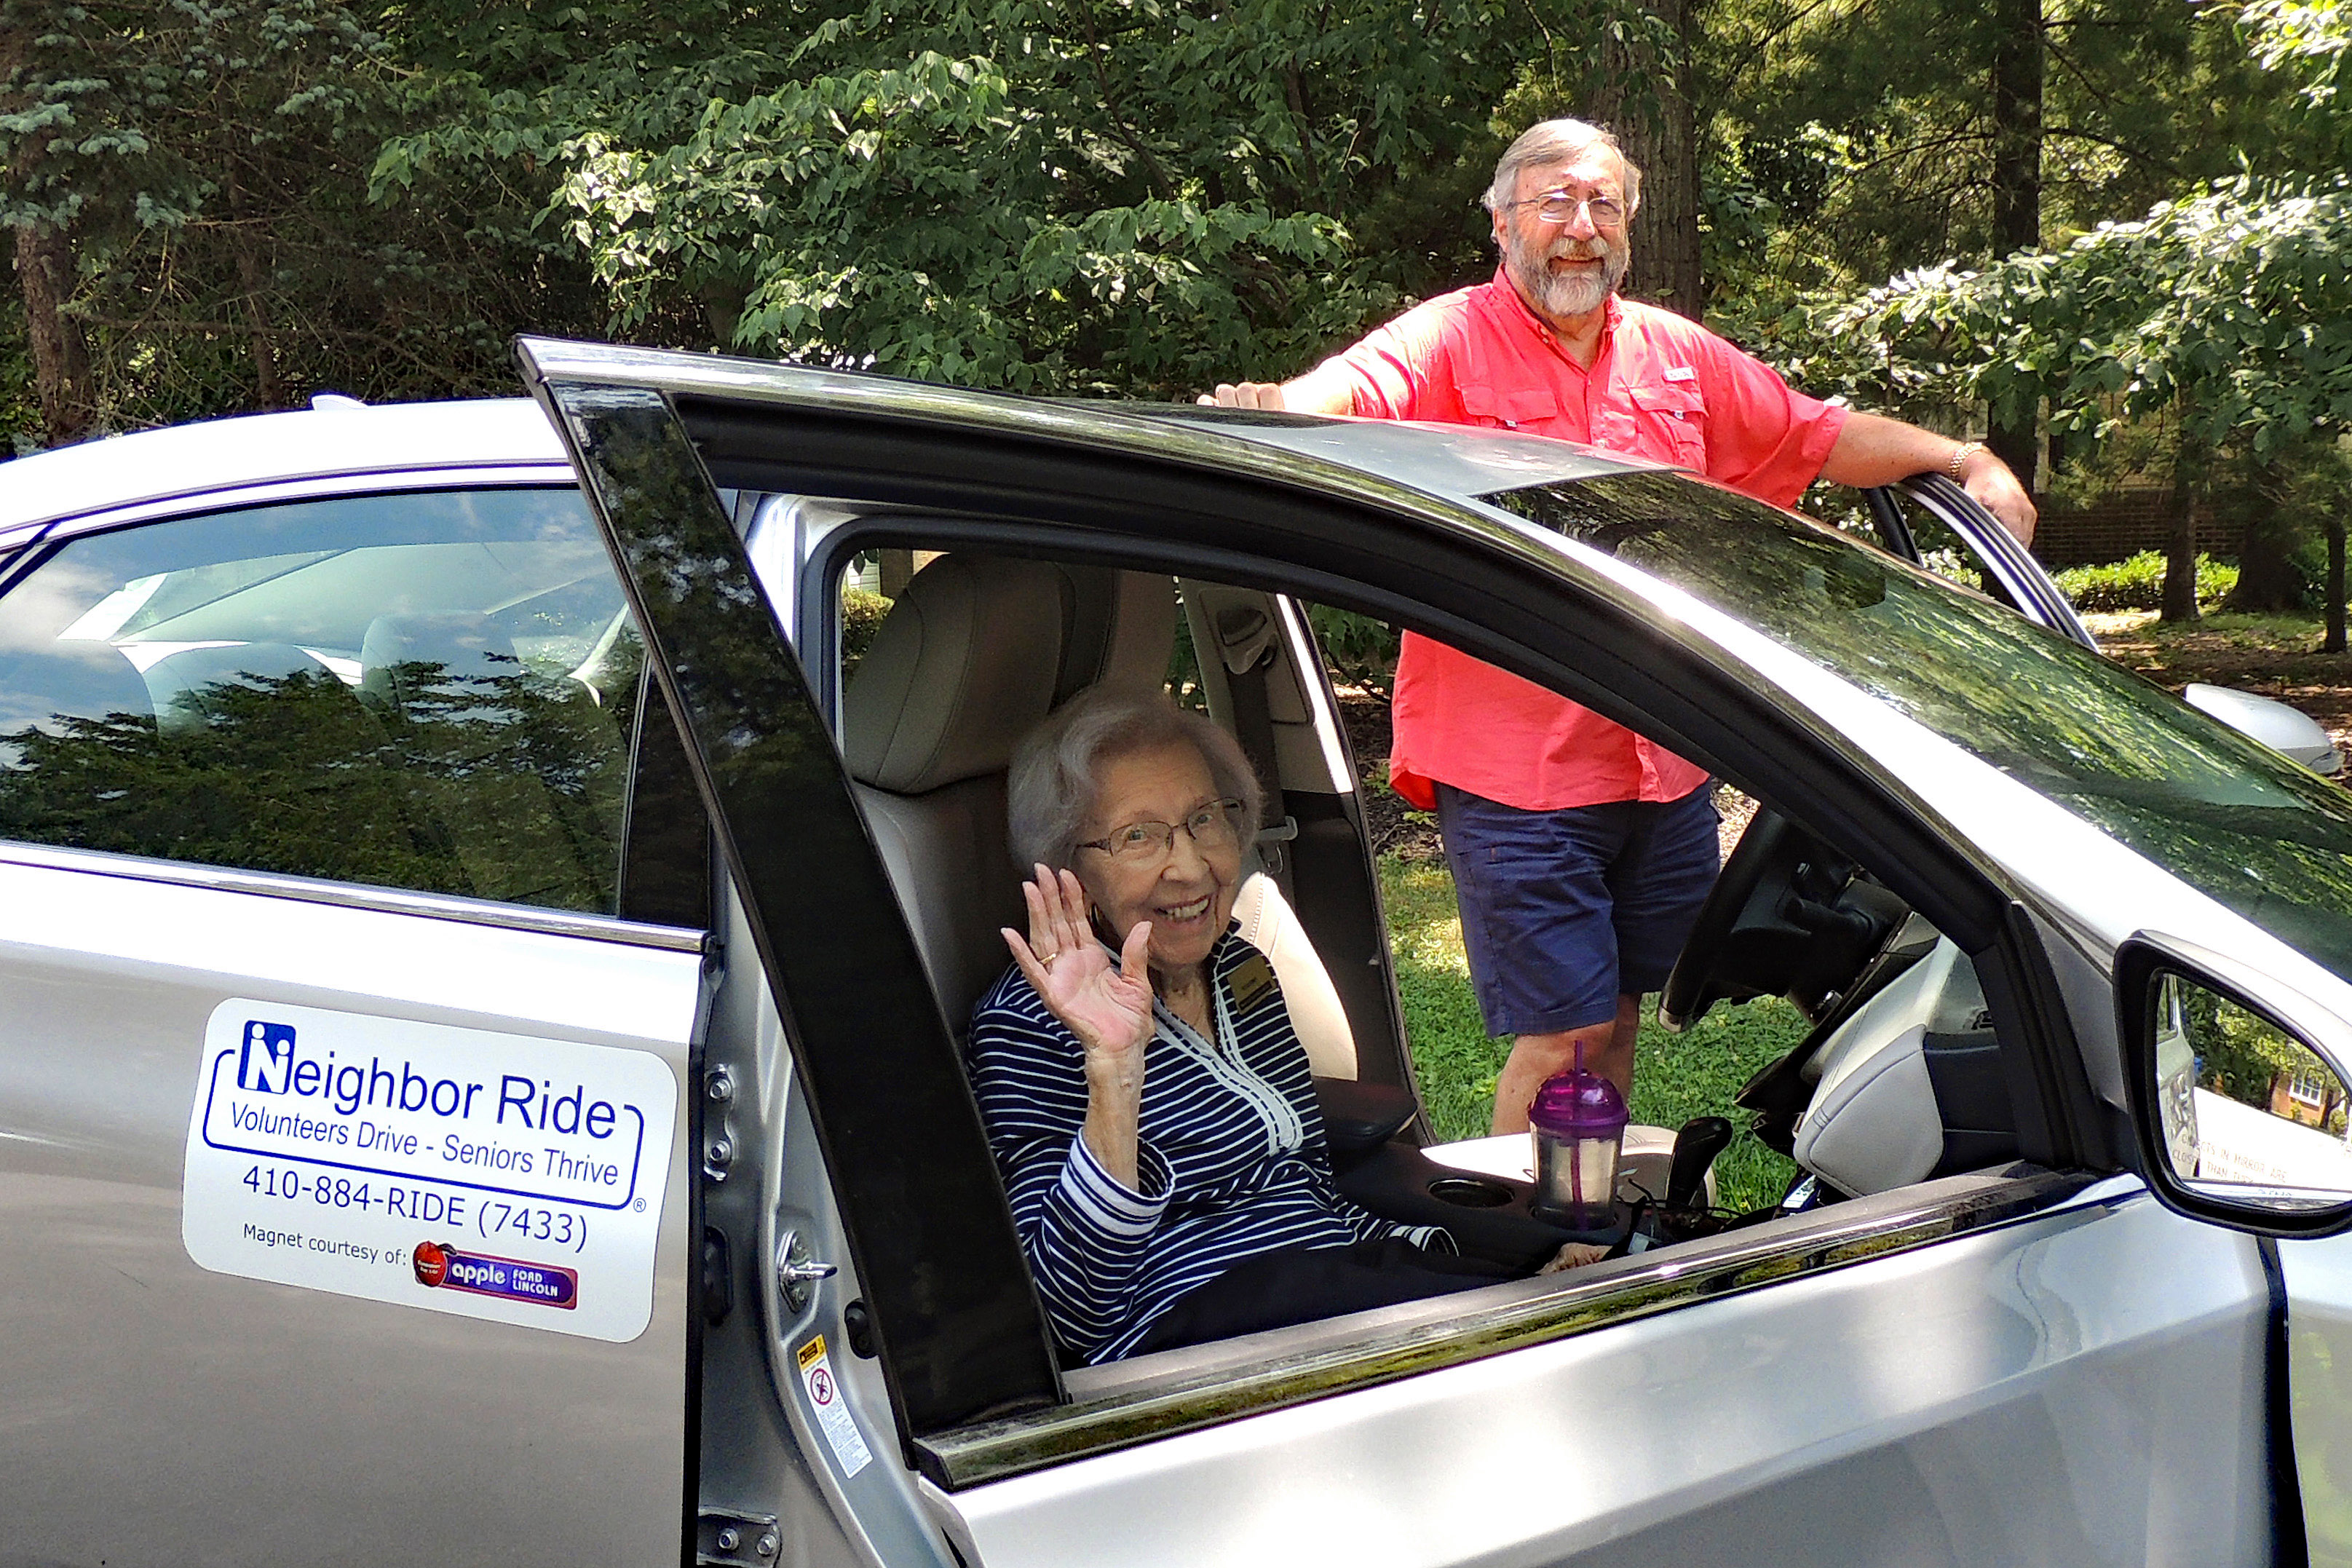 Neighbor Ride's volunteers provide the "wheels" that help seniors stay health, independent, and connected to the community.